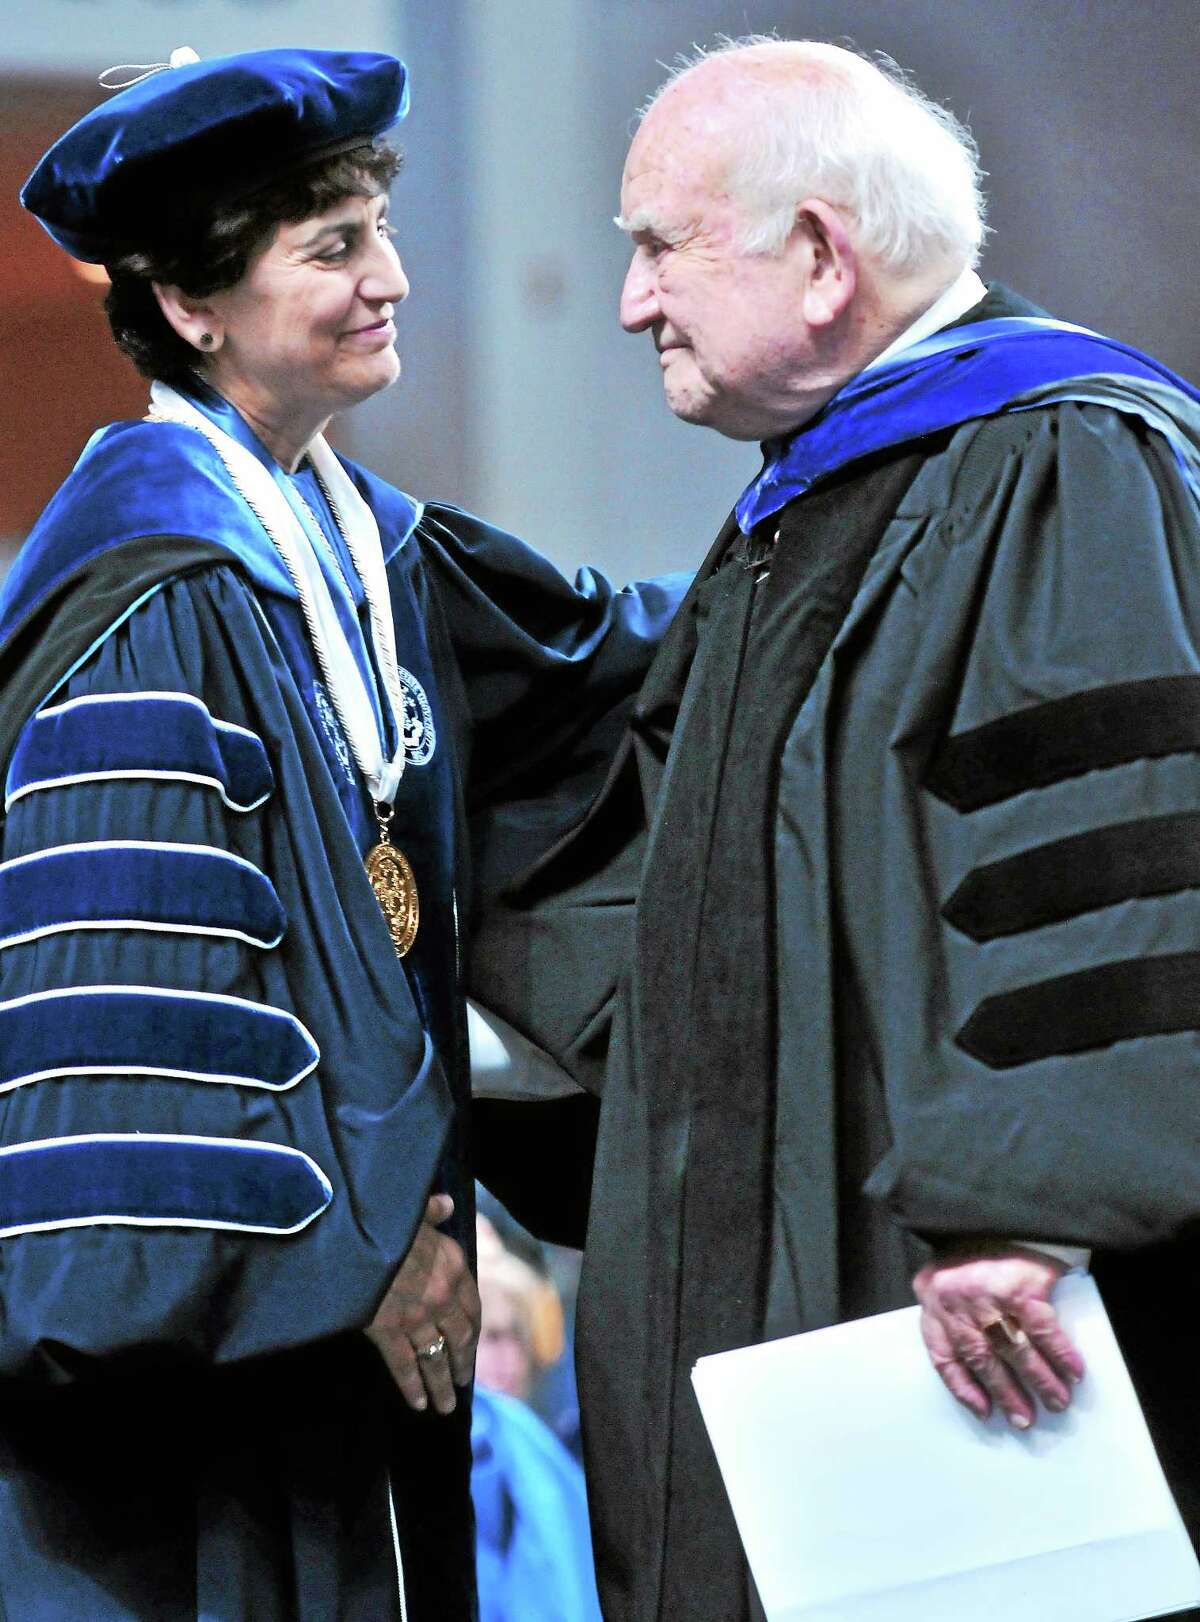 Southern Connecticut State University President Mary Papazian, left, and Edward Asner embrace after Asner gave the Undergraduate Commencement address for Southern at Webster Bank Arena in Bridgeport in May.